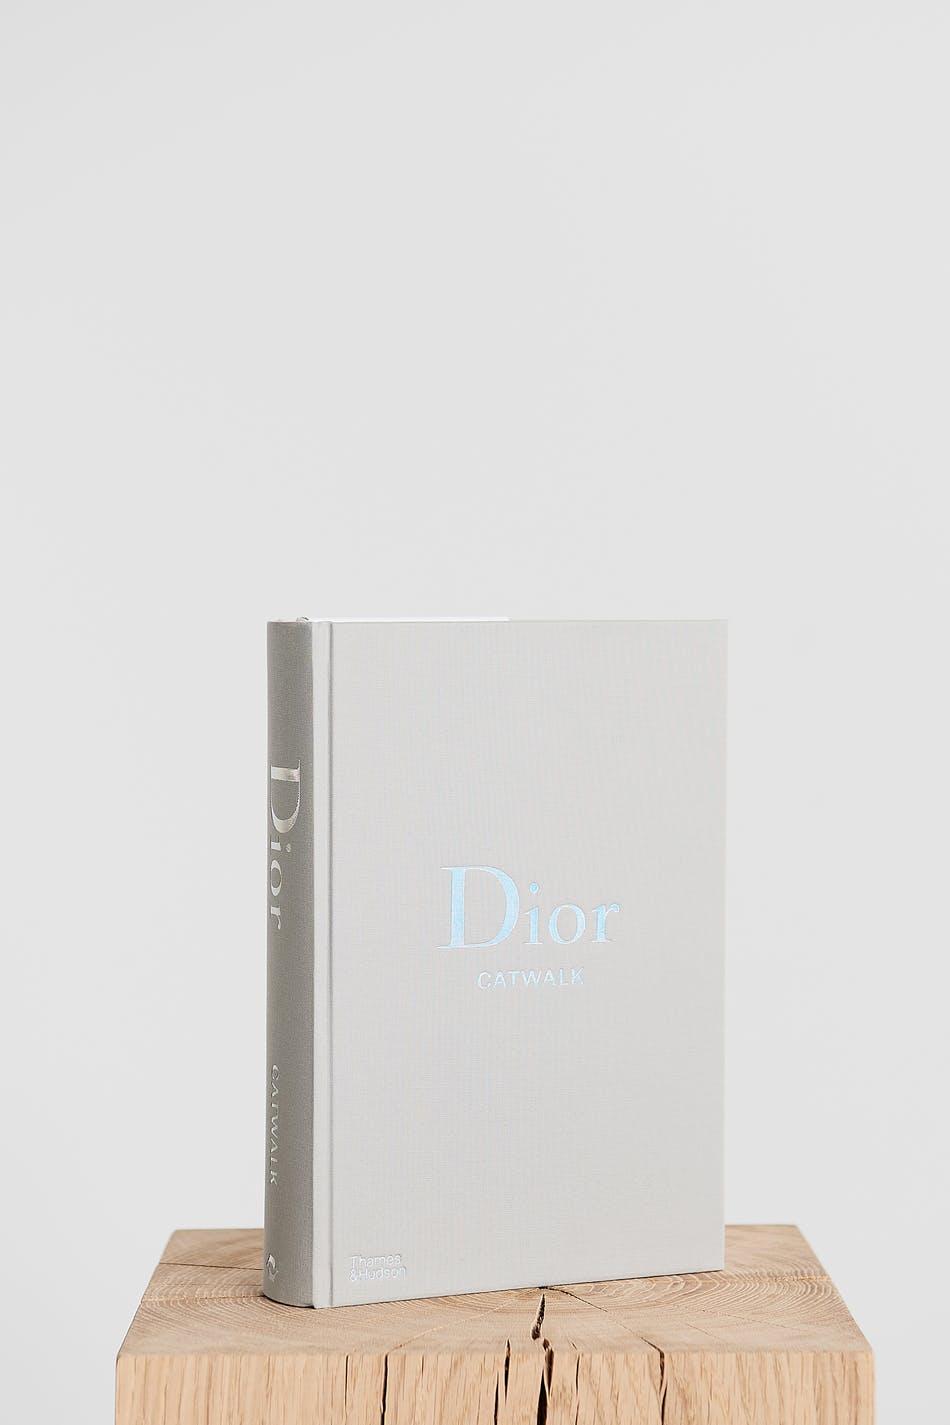 New mags Dior book